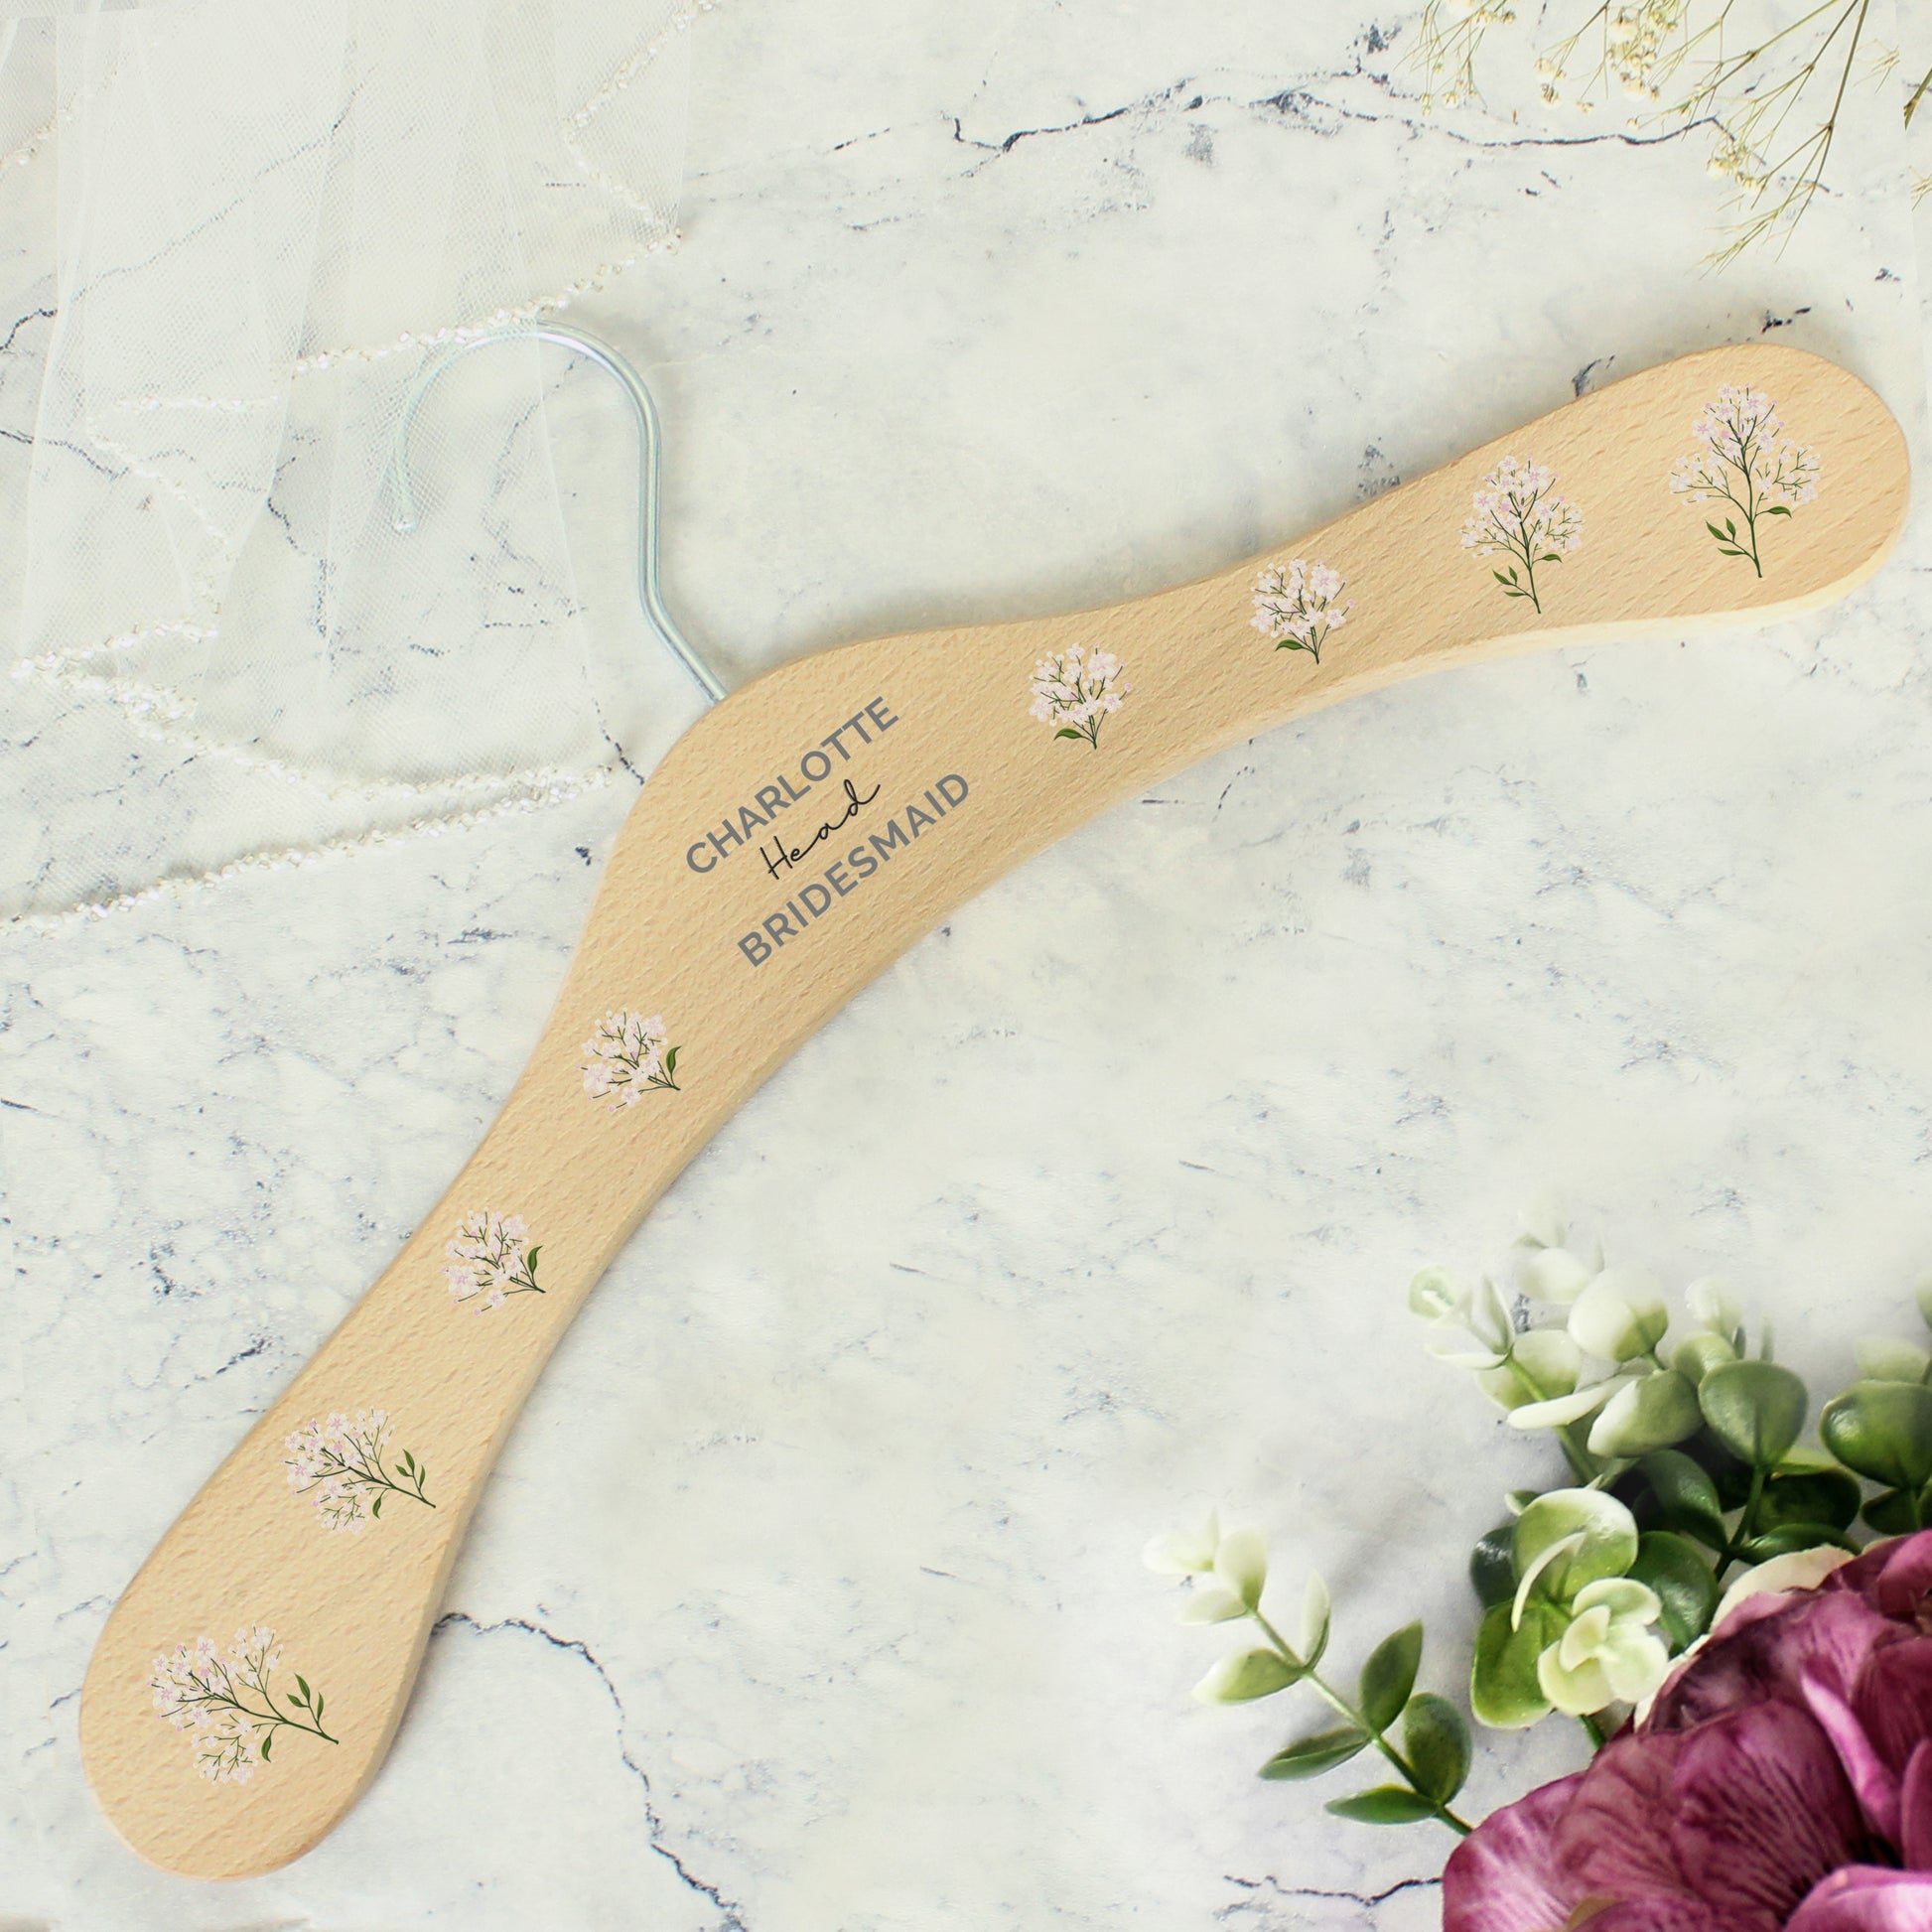 PERSONALISED wooden wedding hanger with three lines of text and flowers along the arms of the hanger